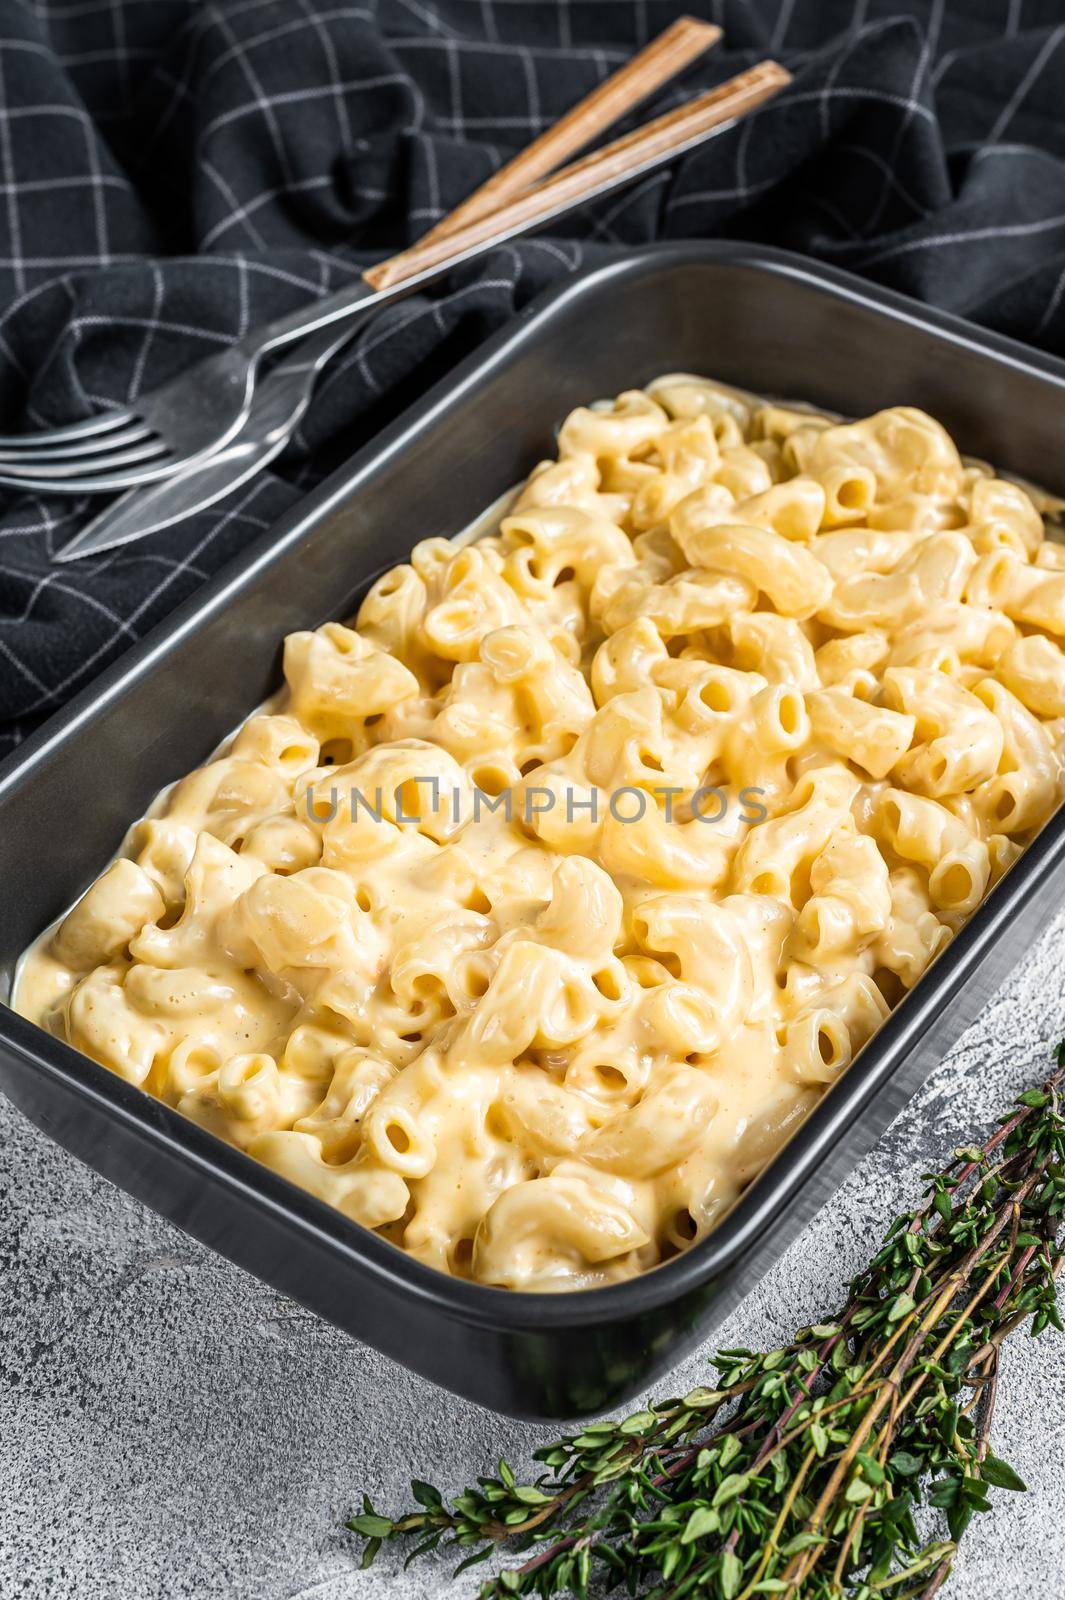 Mac and cheese american macaroni pasta with cheesy Cheddar sauce. White background. Top view by Composter